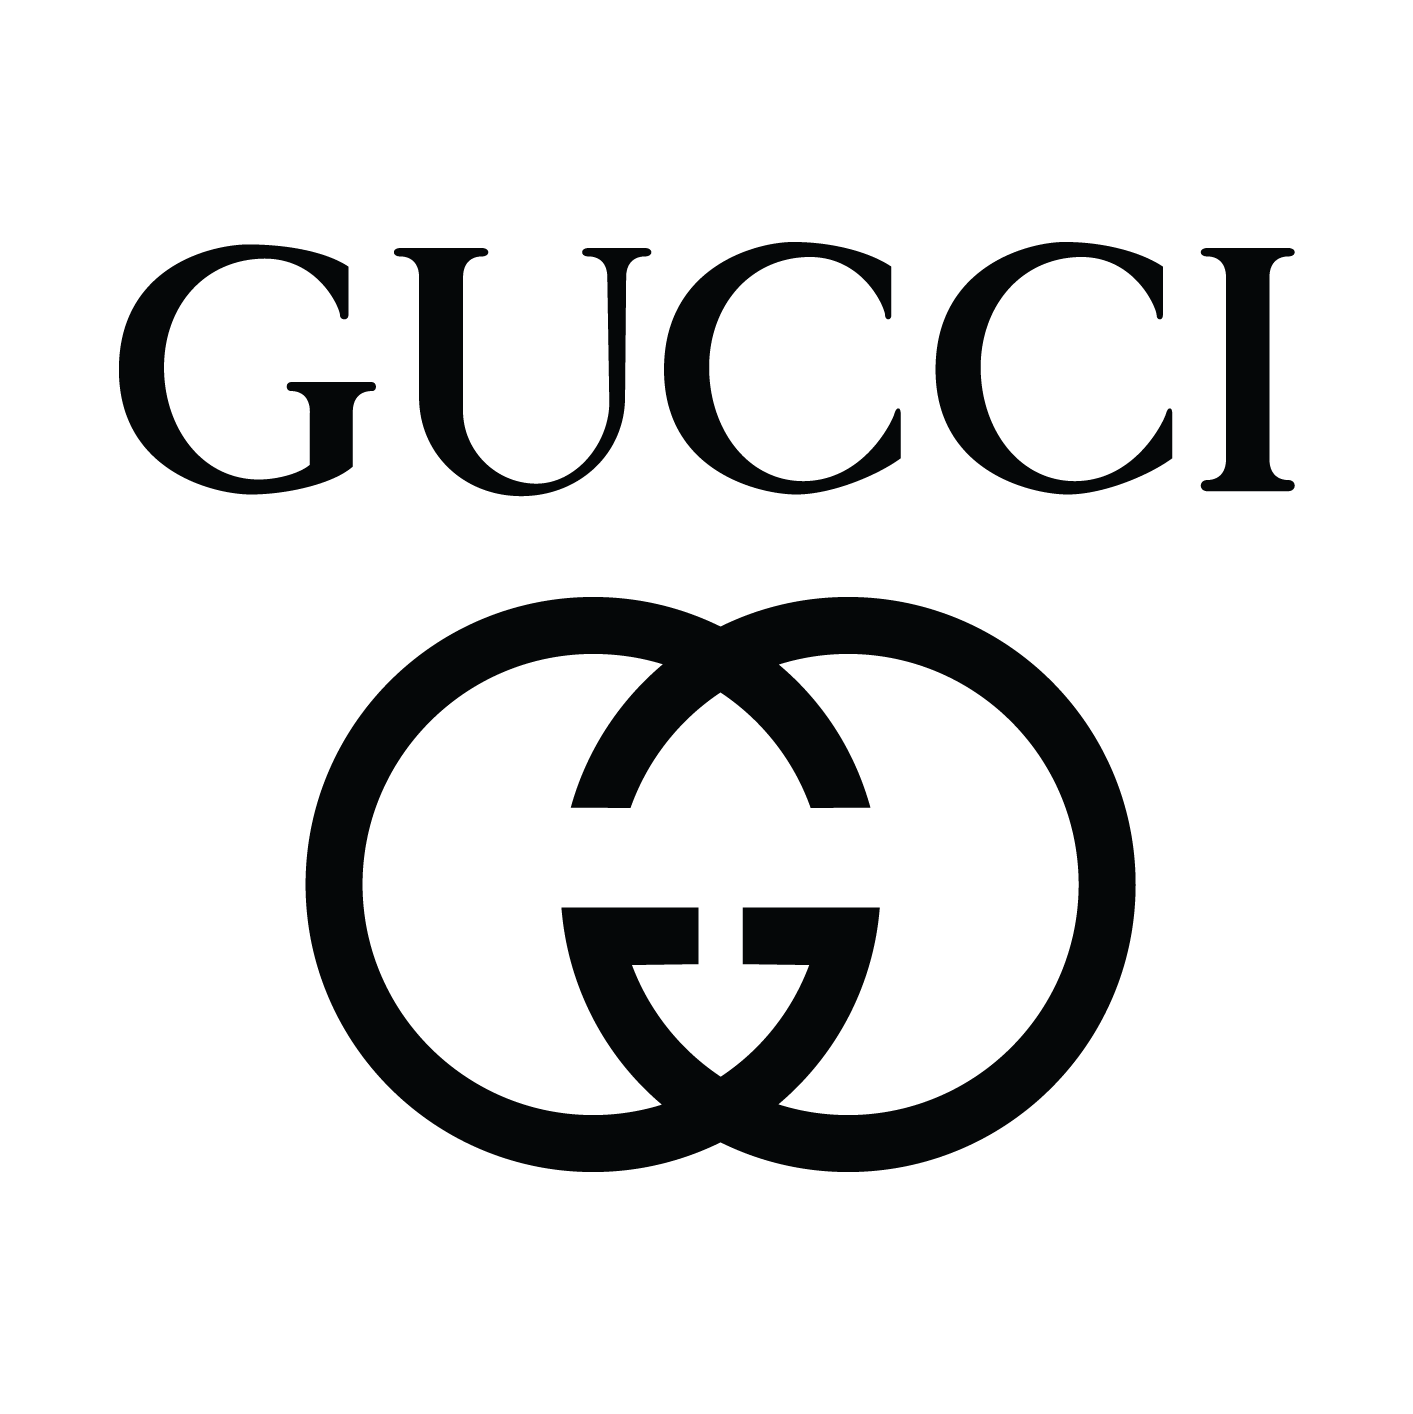 Gucci is one of the oldest luxury brands in the world still in business and Founded in Florence, Italy, by Guccio Gucci.